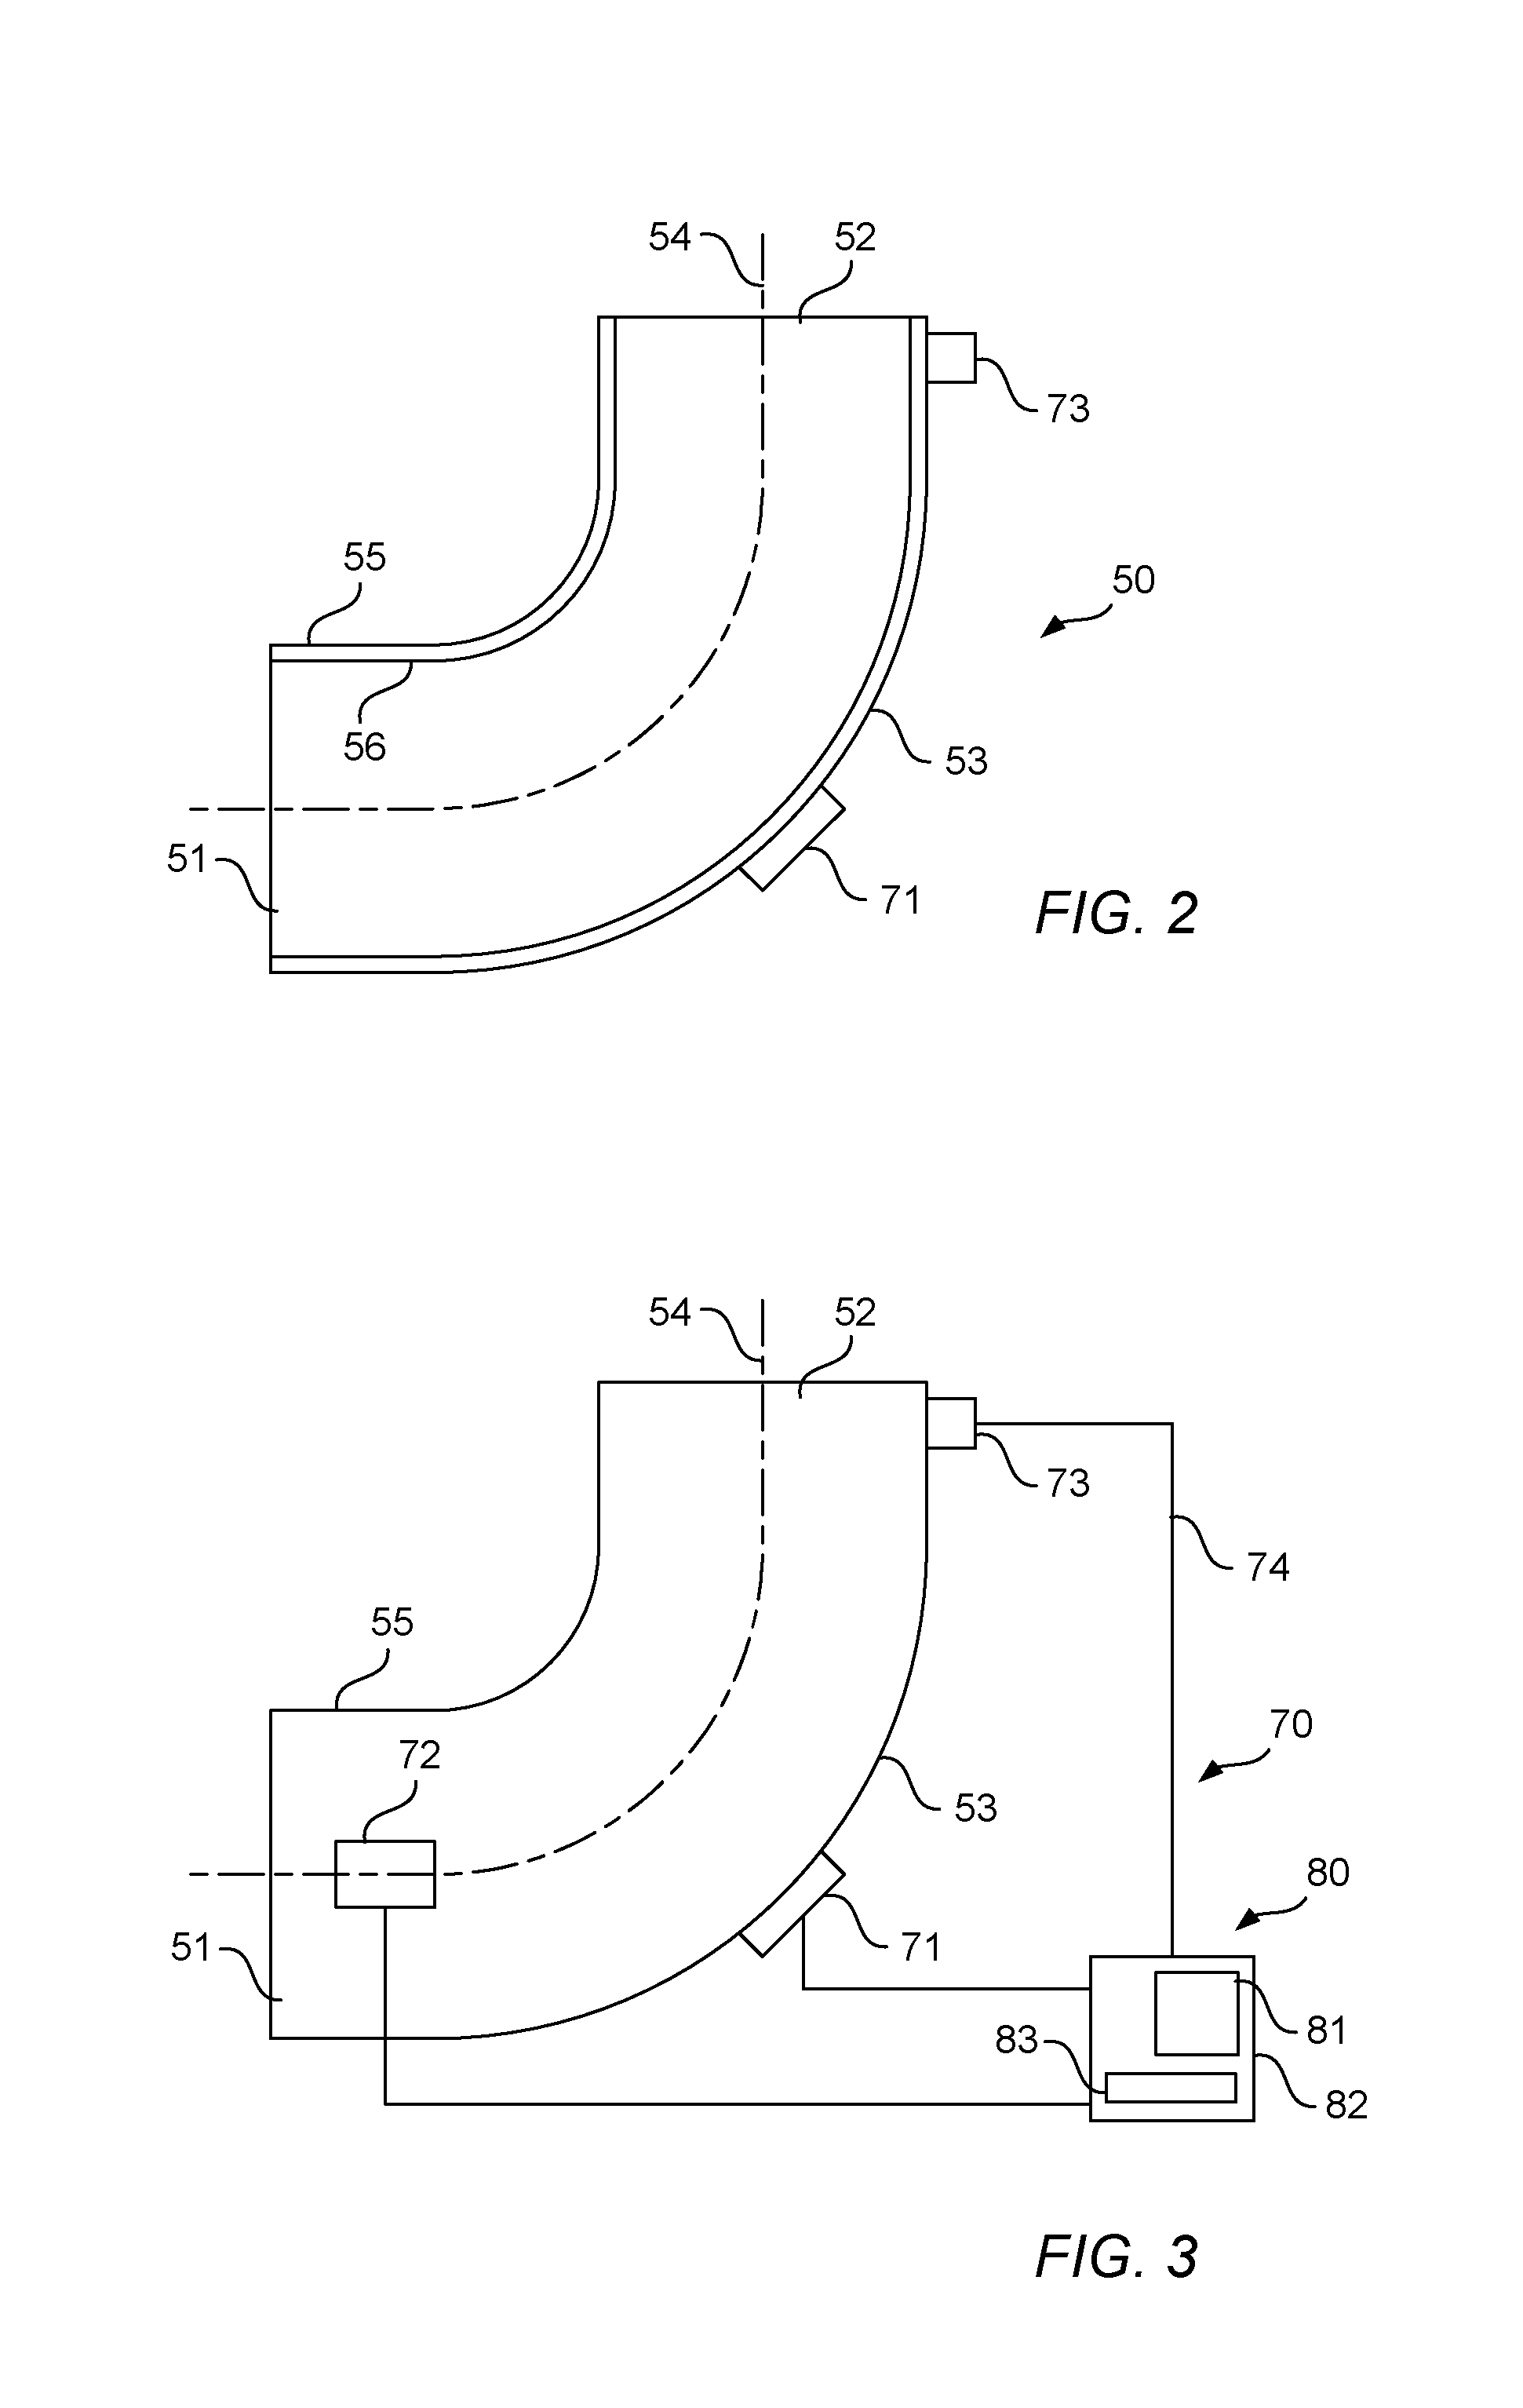 Metering apparatus for and method of determining a characteristic of a fluid flowing through a pipe